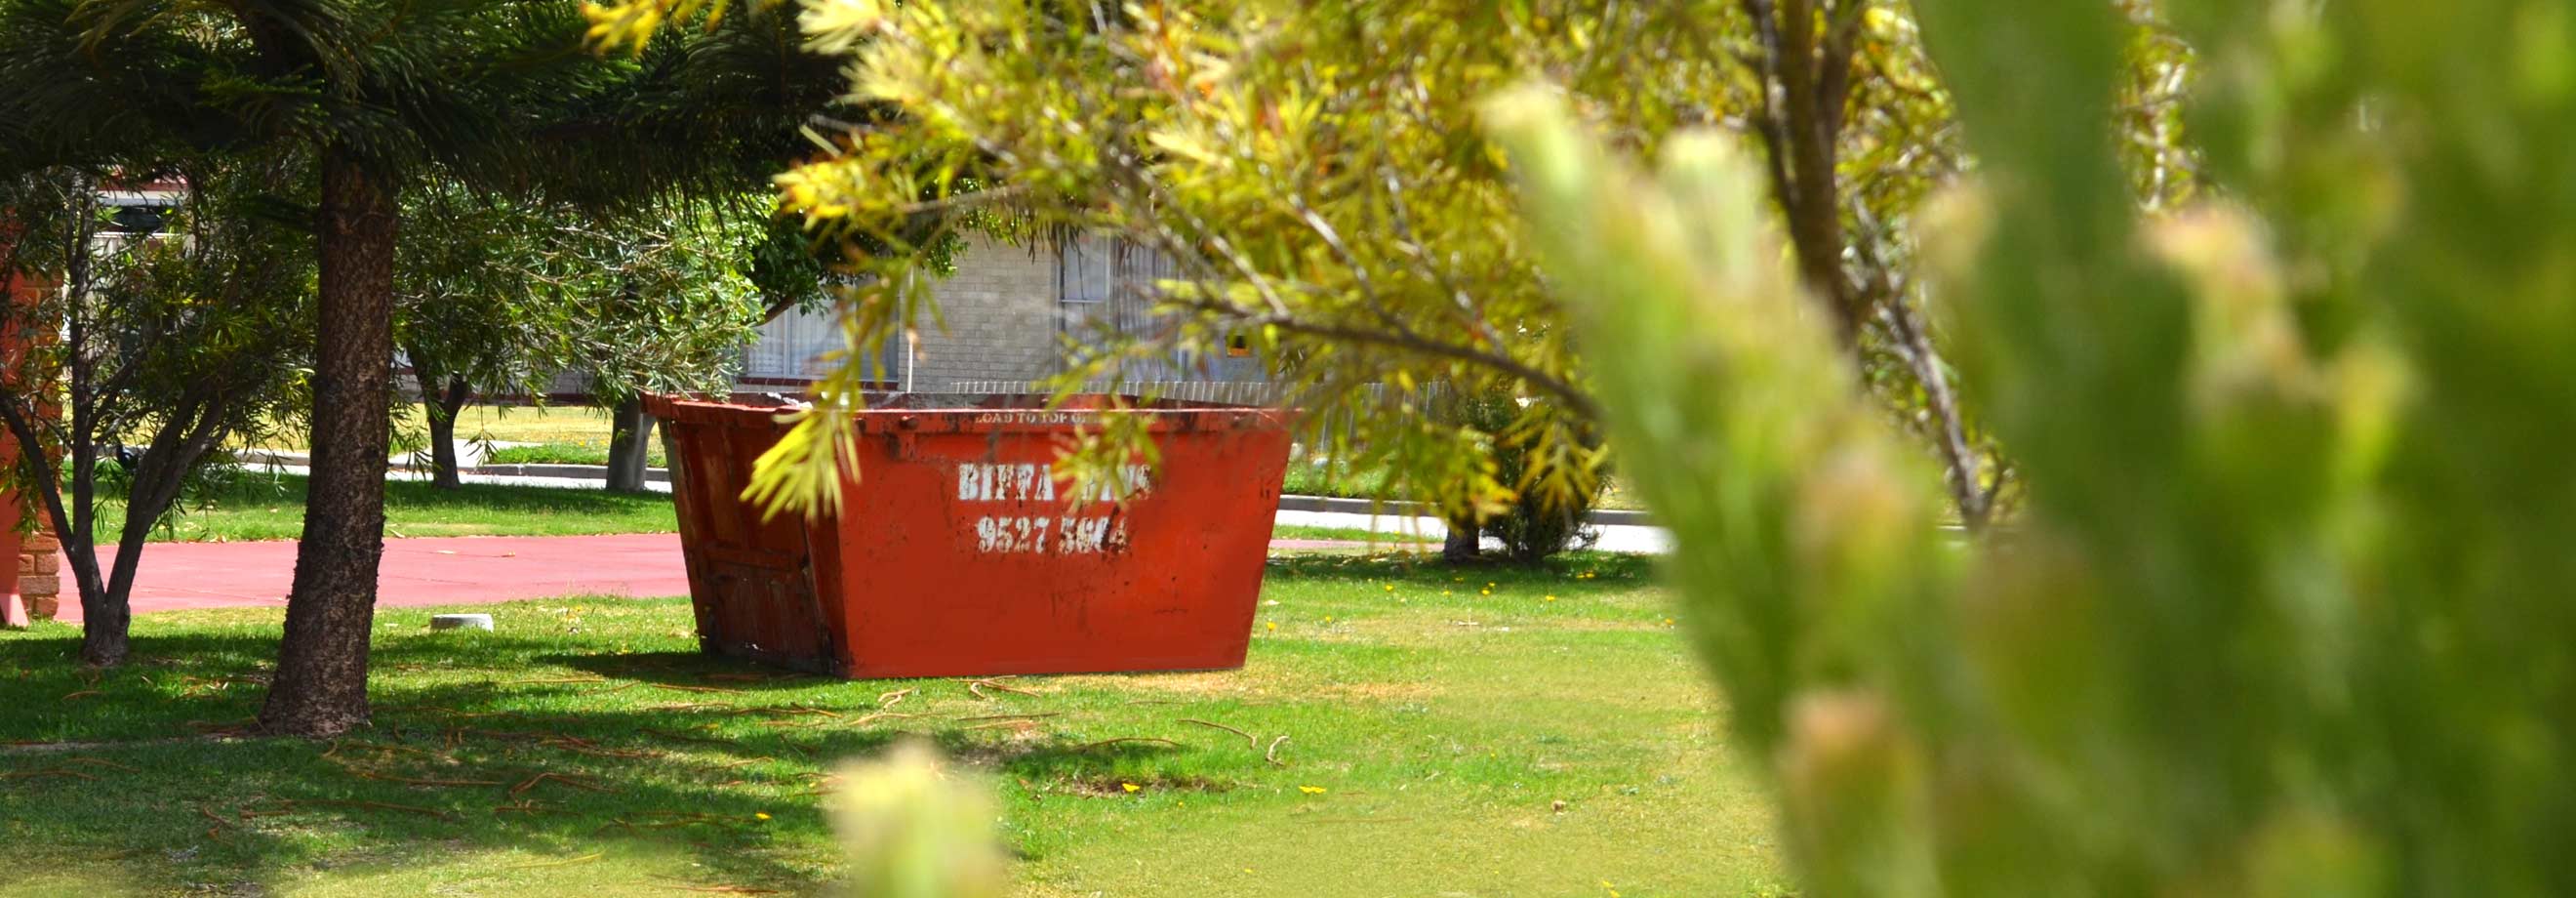 How To Use And Hire A Skip Bin